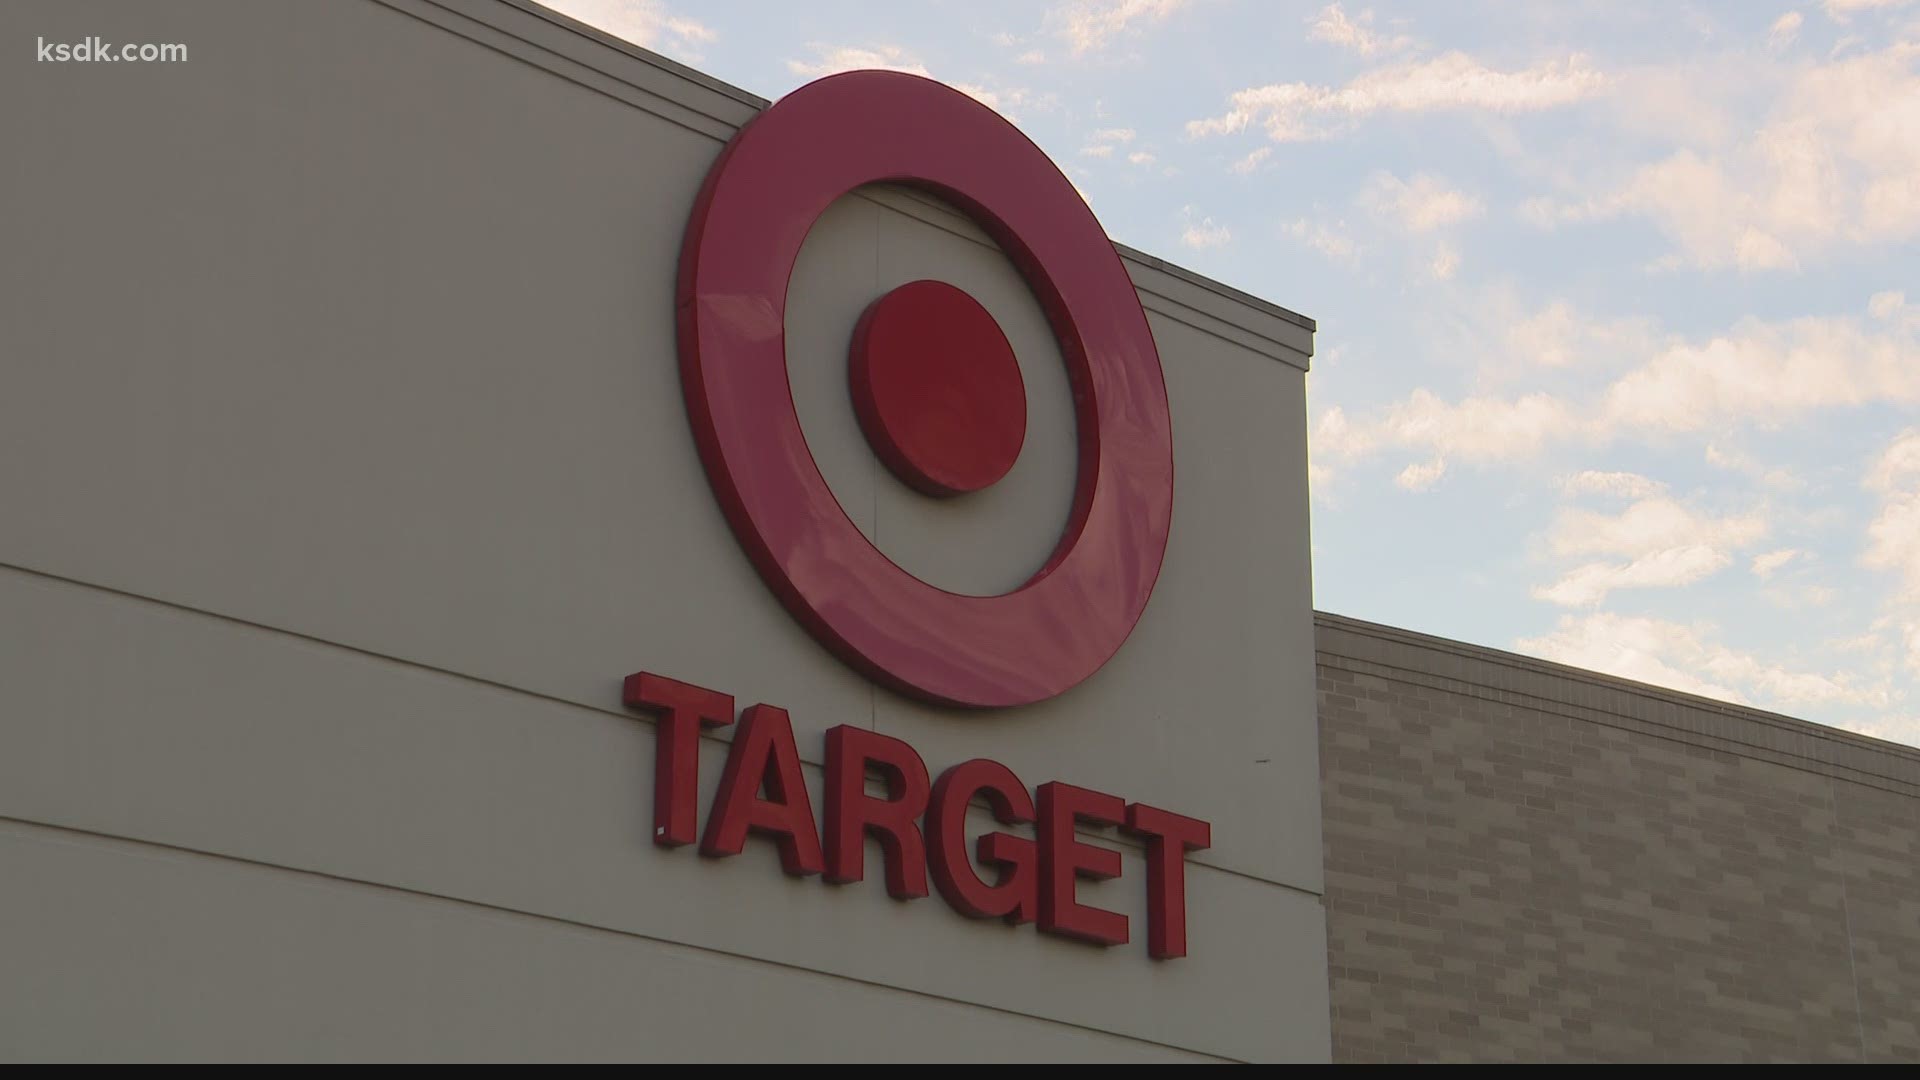 More than 170 Target stores around the country have opted to temporarily close.